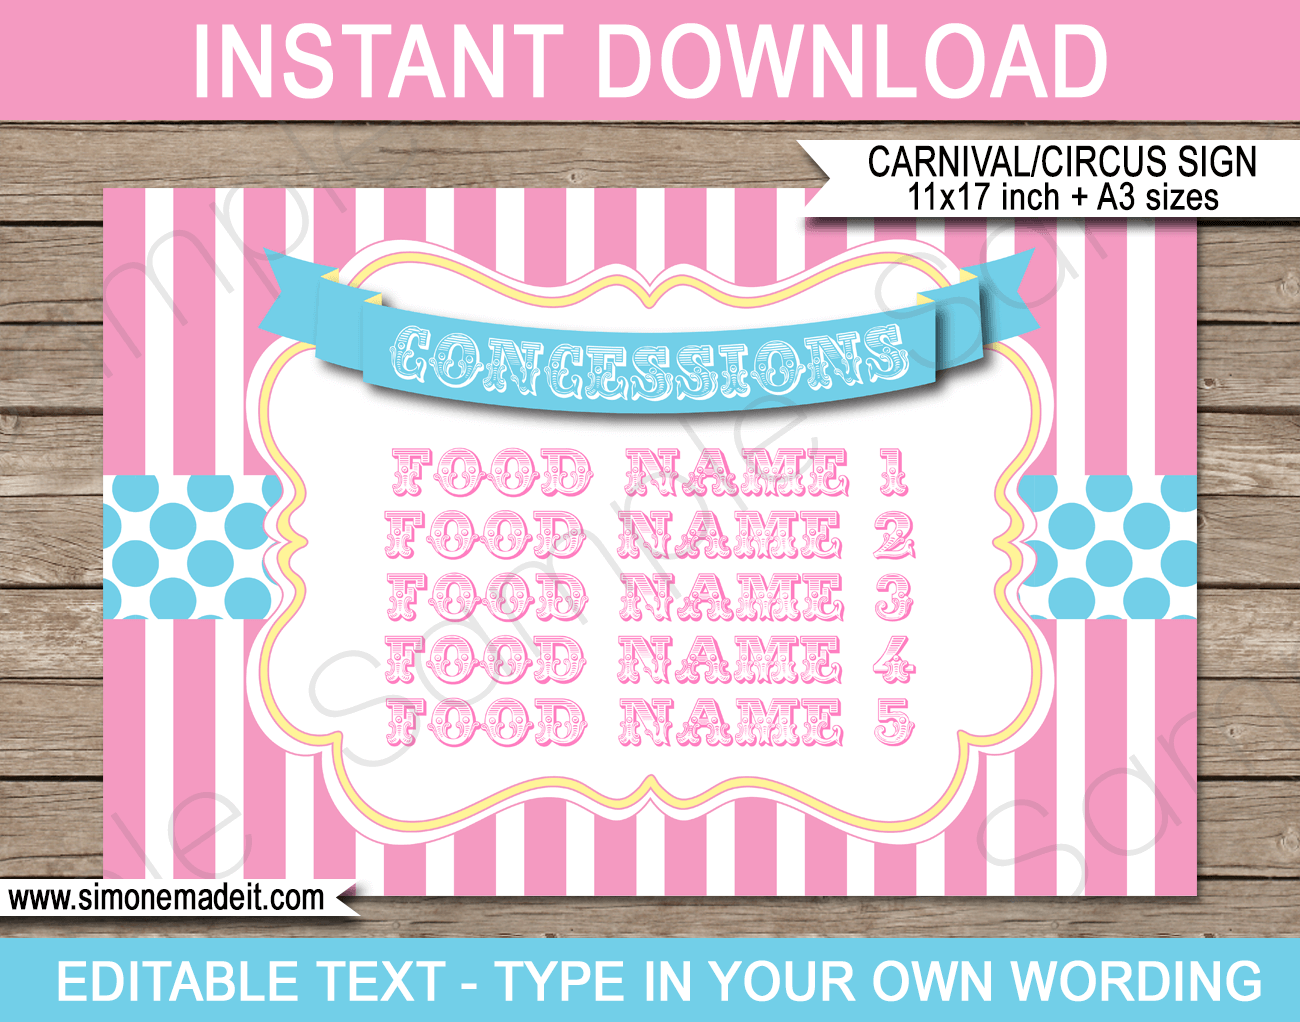 Printable Carnival Birthday Concessions Signs | Editable Text DIY Template | Circus Theme Party Decorations | $4.00 Instant Download via SIMONEmadeit.com